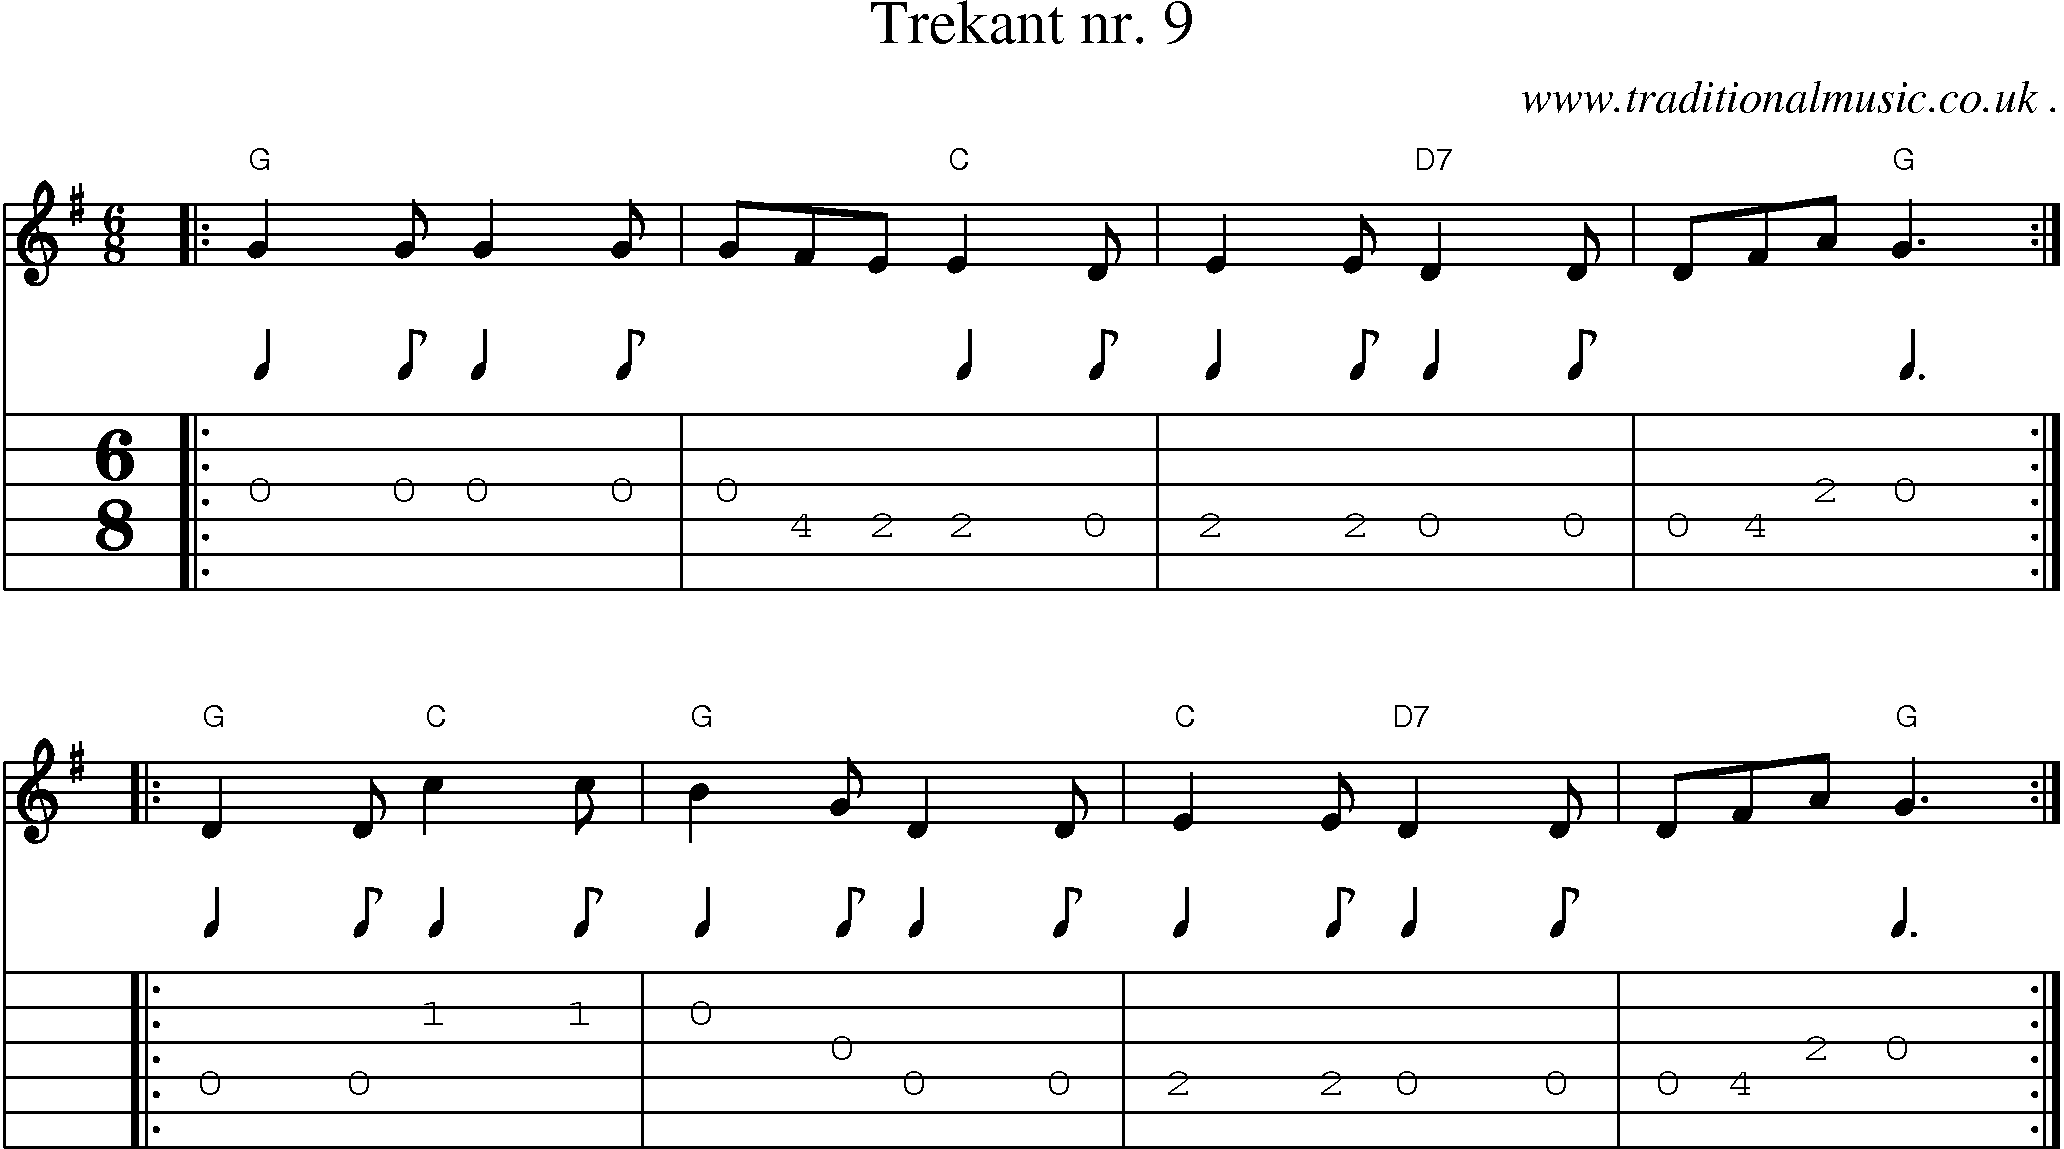 Sheet-music  score, Chords and Guitar Tabs for Trekant Nr 9